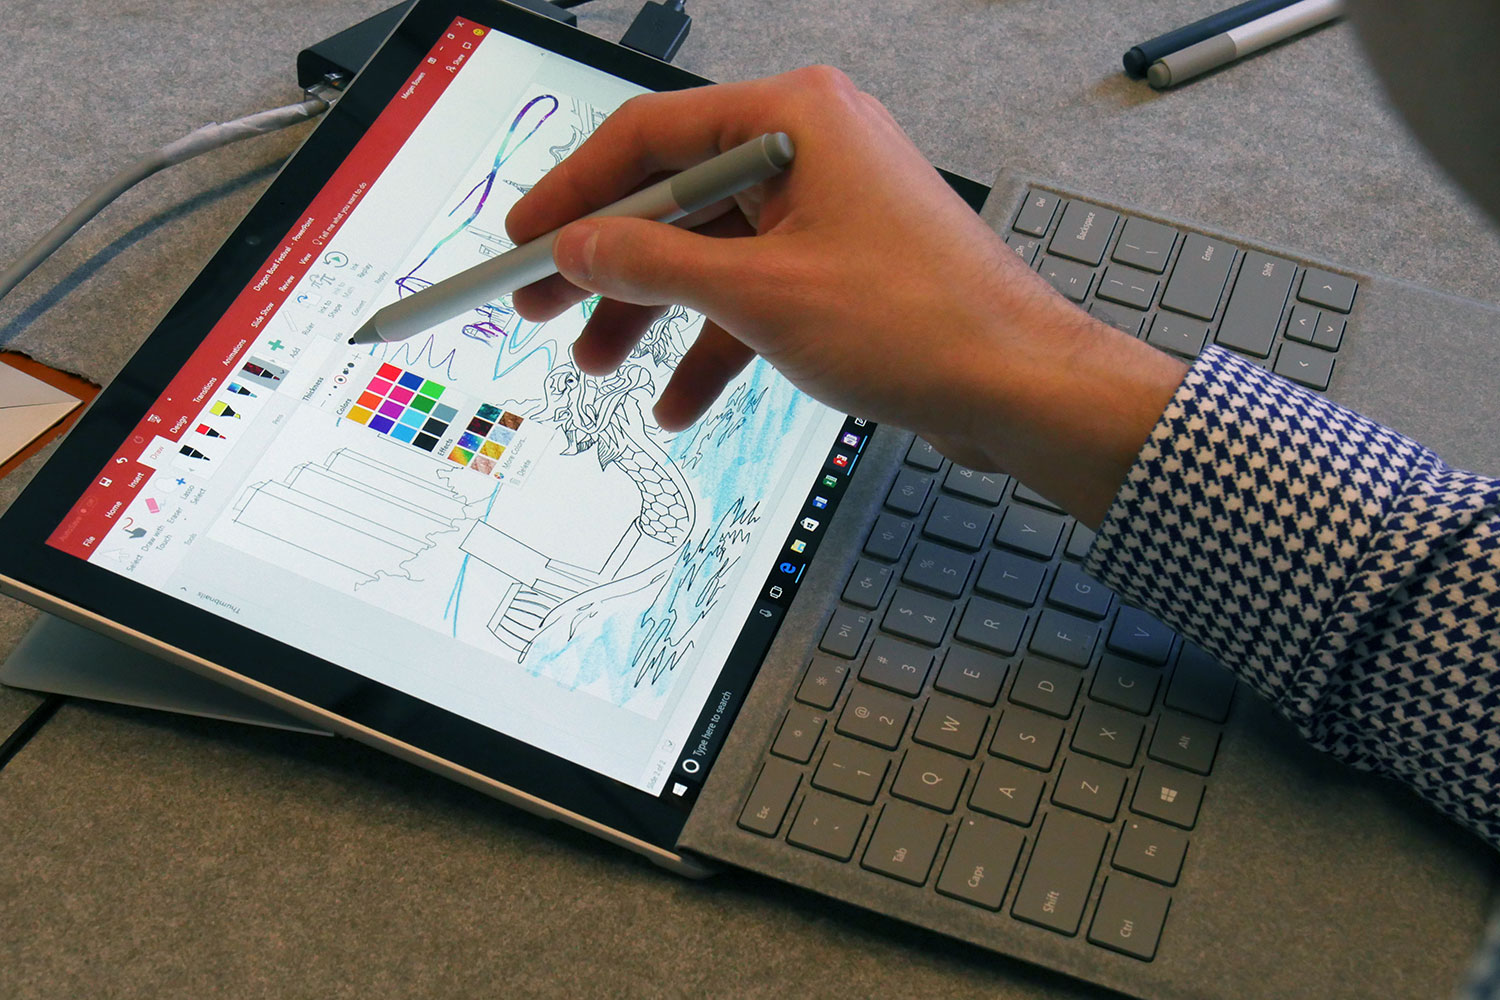 Microsoft Surface Pro (2017): Price, Features, Availability, and